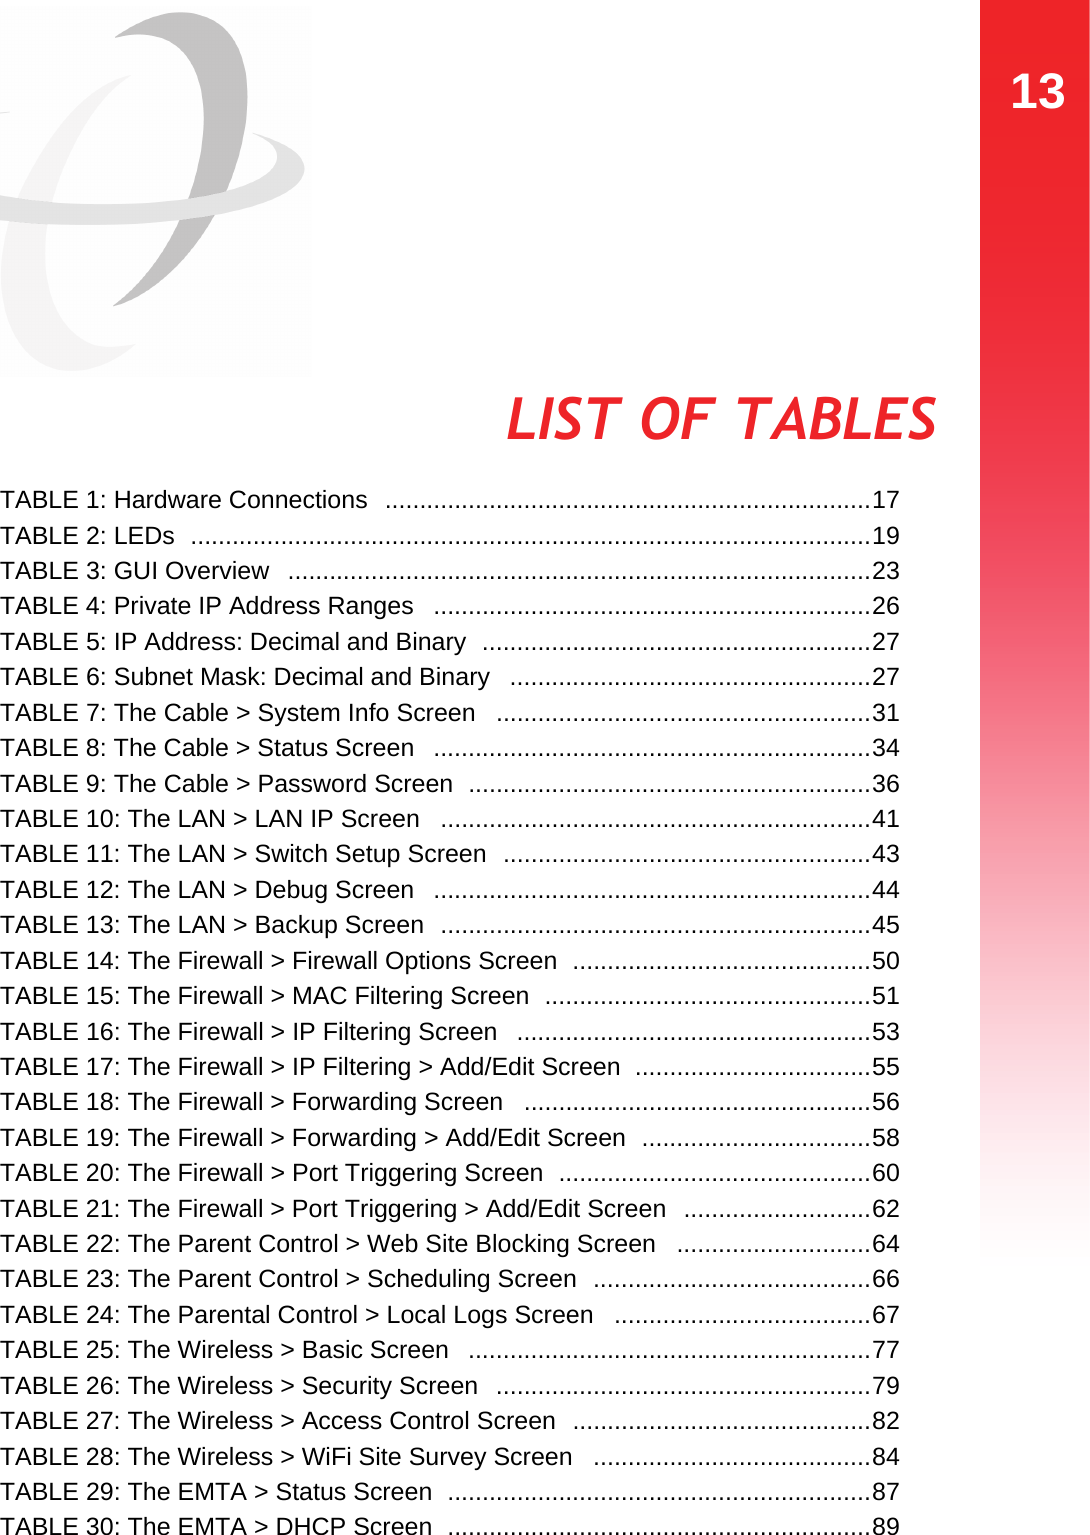 13LIST OF TABLESLIST OF TABLESTABLE 1: Hardware Connections  ......................................................................17TABLE 2: LEDs  ..................................................................................................19TABLE 3: GUI Overview   ....................................................................................23TABLE 4: Private IP Address Ranges   ...............................................................26TABLE 5: IP Address: Decimal and Binary  ........................................................27TABLE 6: Subnet Mask: Decimal and Binary   ....................................................27TABLE 7: The Cable &gt; System Info Screen   ......................................................31TABLE 8: The Cable &gt; Status Screen   ...............................................................34TABLE 9: The Cable &gt; Password Screen  ..........................................................36TABLE 10: The LAN &gt; LAN IP Screen   ..............................................................41TABLE 11: The LAN &gt; Switch Setup Screen  .....................................................43TABLE 12: The LAN &gt; Debug Screen   ...............................................................44TABLE 13: The LAN &gt; Backup Screen  ..............................................................45TABLE 14: The Firewall &gt; Firewall Options Screen  ...........................................50TABLE 15: The Firewall &gt; MAC Filtering Screen  ...............................................51TABLE 16: The Firewall &gt; IP Filtering Screen   ...................................................53TABLE 17: The Firewall &gt; IP Filtering &gt; Add/Edit Screen  ..................................55TABLE 18: The Firewall &gt; Forwarding Screen   ..................................................56TABLE 19: The Firewall &gt; Forwarding &gt; Add/Edit Screen  .................................58TABLE 20: The Firewall &gt; Port Triggering Screen  .............................................60TABLE 21: The Firewall &gt; Port Triggering &gt; Add/Edit Screen  ...........................62TABLE 22: The Parent Control &gt; Web Site Blocking Screen  ............................64TABLE 23: The Parent Control &gt; Scheduling Screen  ........................................66TABLE 24: The Parental Control &gt; Local Logs Screen   .....................................67TABLE 25: The Wireless &gt; Basic Screen   ..........................................................77TABLE 26: The Wireless &gt; Security Screen  ......................................................79TABLE 27: The Wireless &gt; Access Control Screen  ...........................................82TABLE 28: The Wireless &gt; WiFi Site Survey Screen   ........................................84TABLE 29: The EMTA &gt; Status Screen  .............................................................87TABLE 30: The EMTA &gt; DHCP Screen  .............................................................89